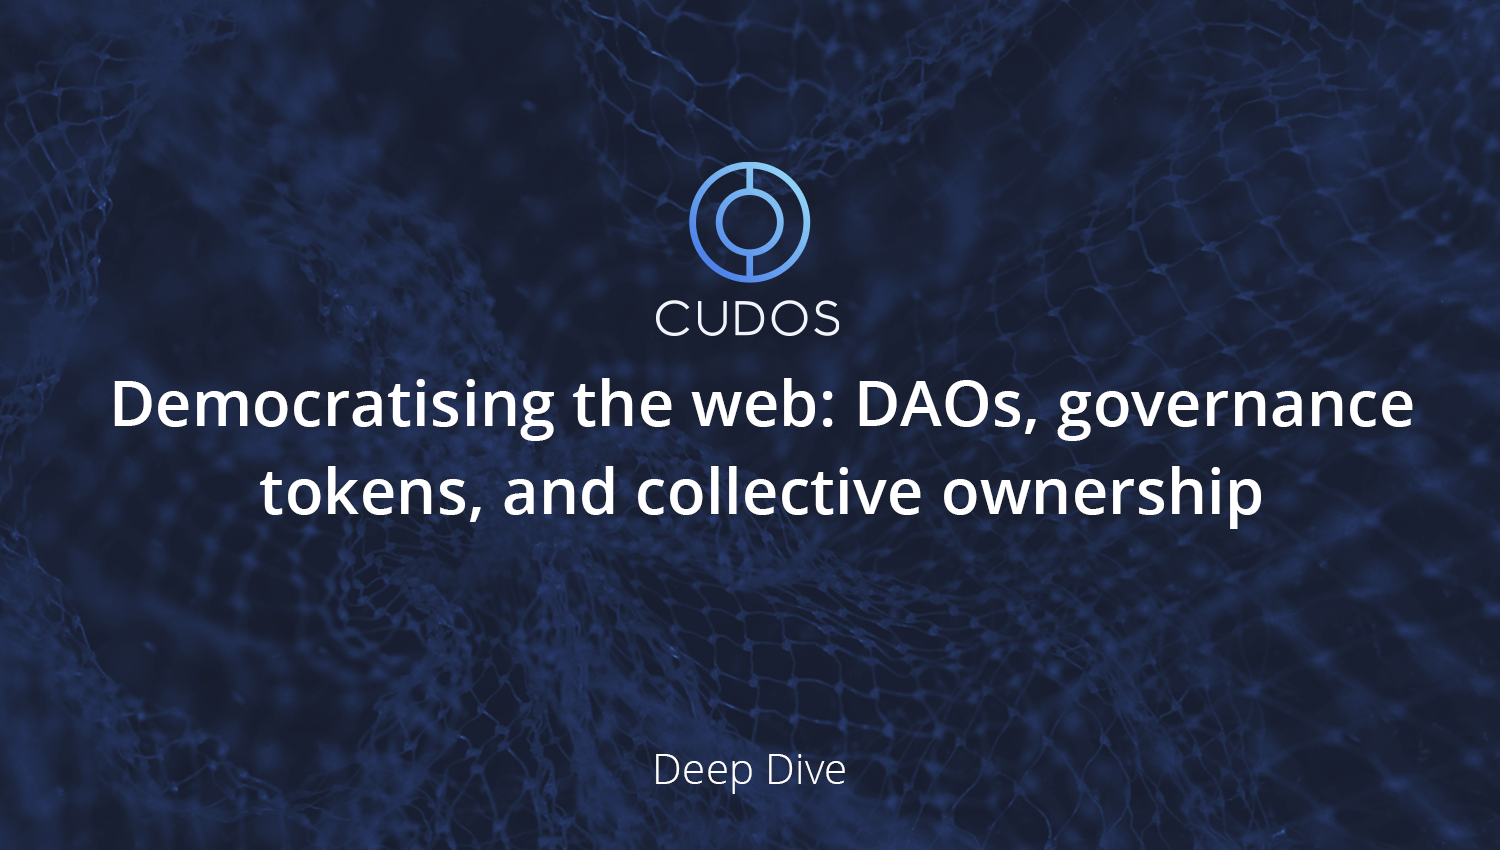 Democratising the web: DAOs, governance tokens, and collective ownership